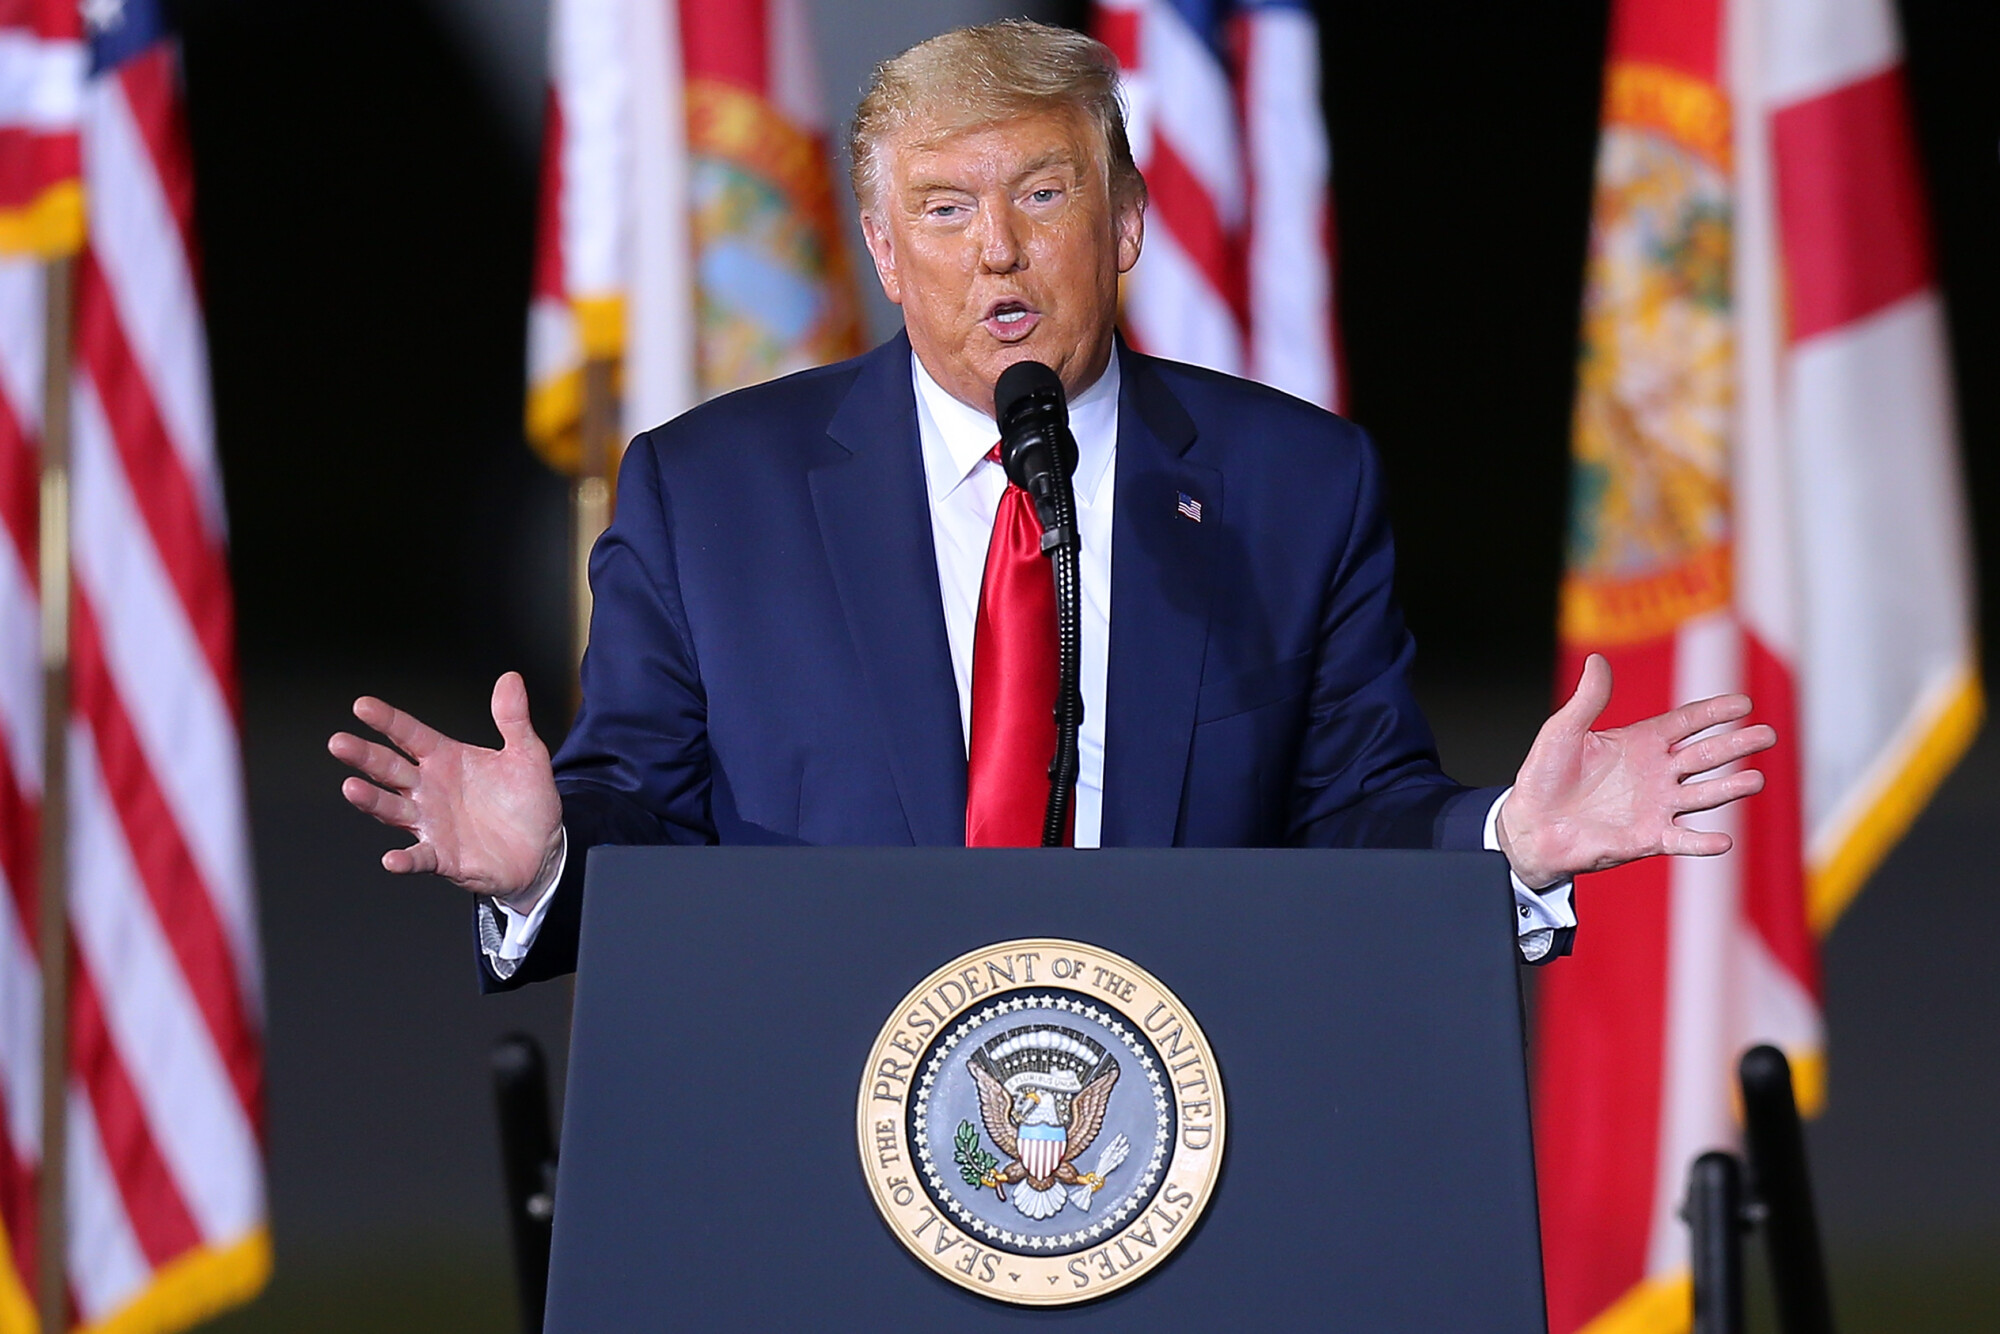 Trump: Biden Border Agenda Has Turned ‘A National Triumph Into a National Disaster’